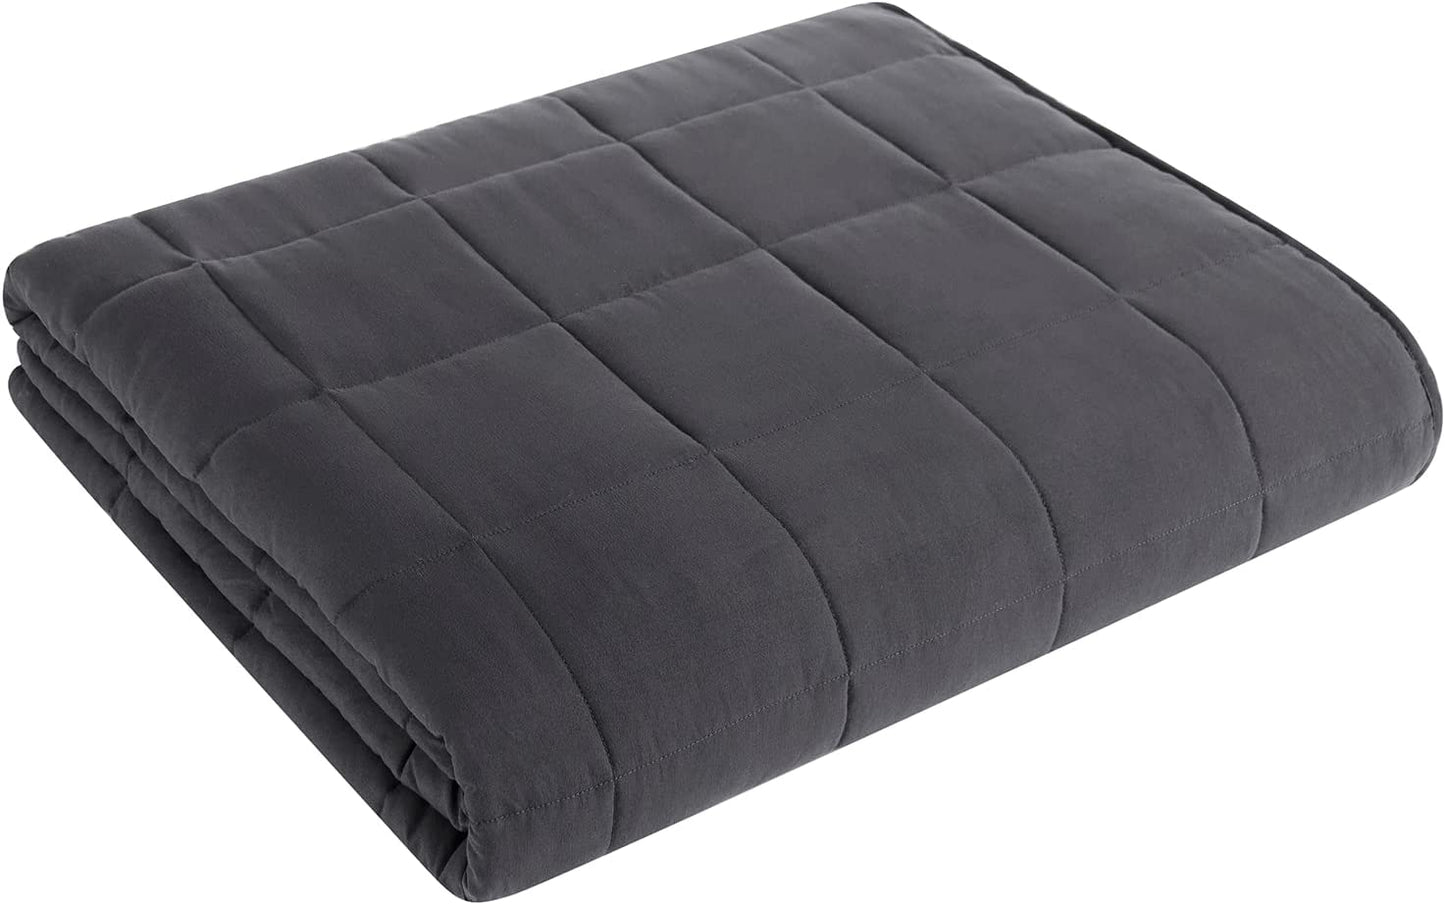 Weighted Blanket 25lbs w/ Glass Beads Big Blanket for Adult All-Season 88x104